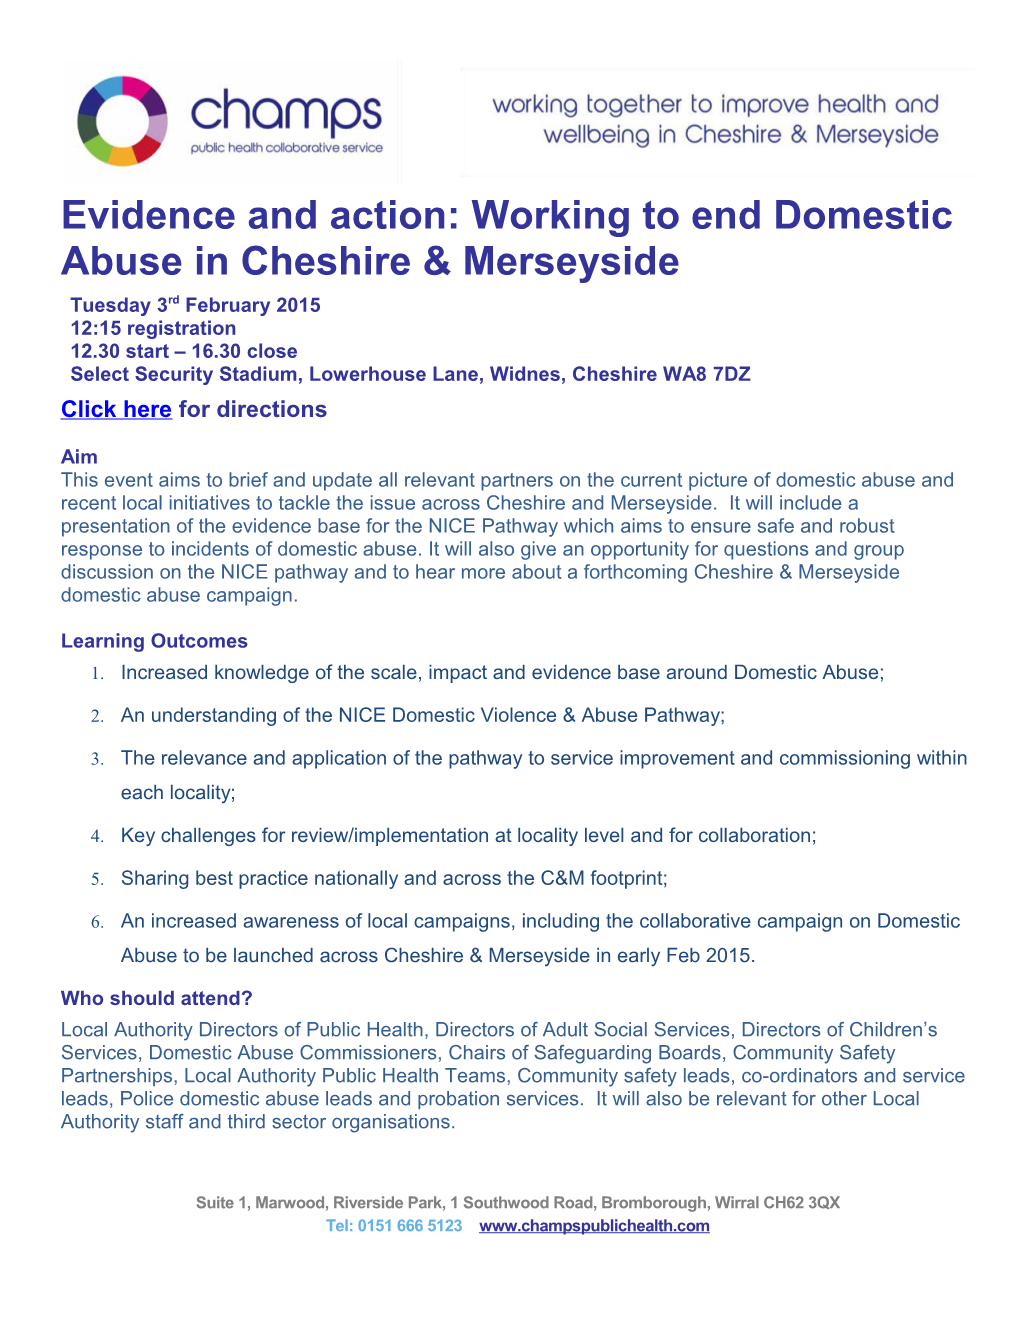 Evidence and Action: Working to End Domestic Abuse in Cheshire & Merseyside